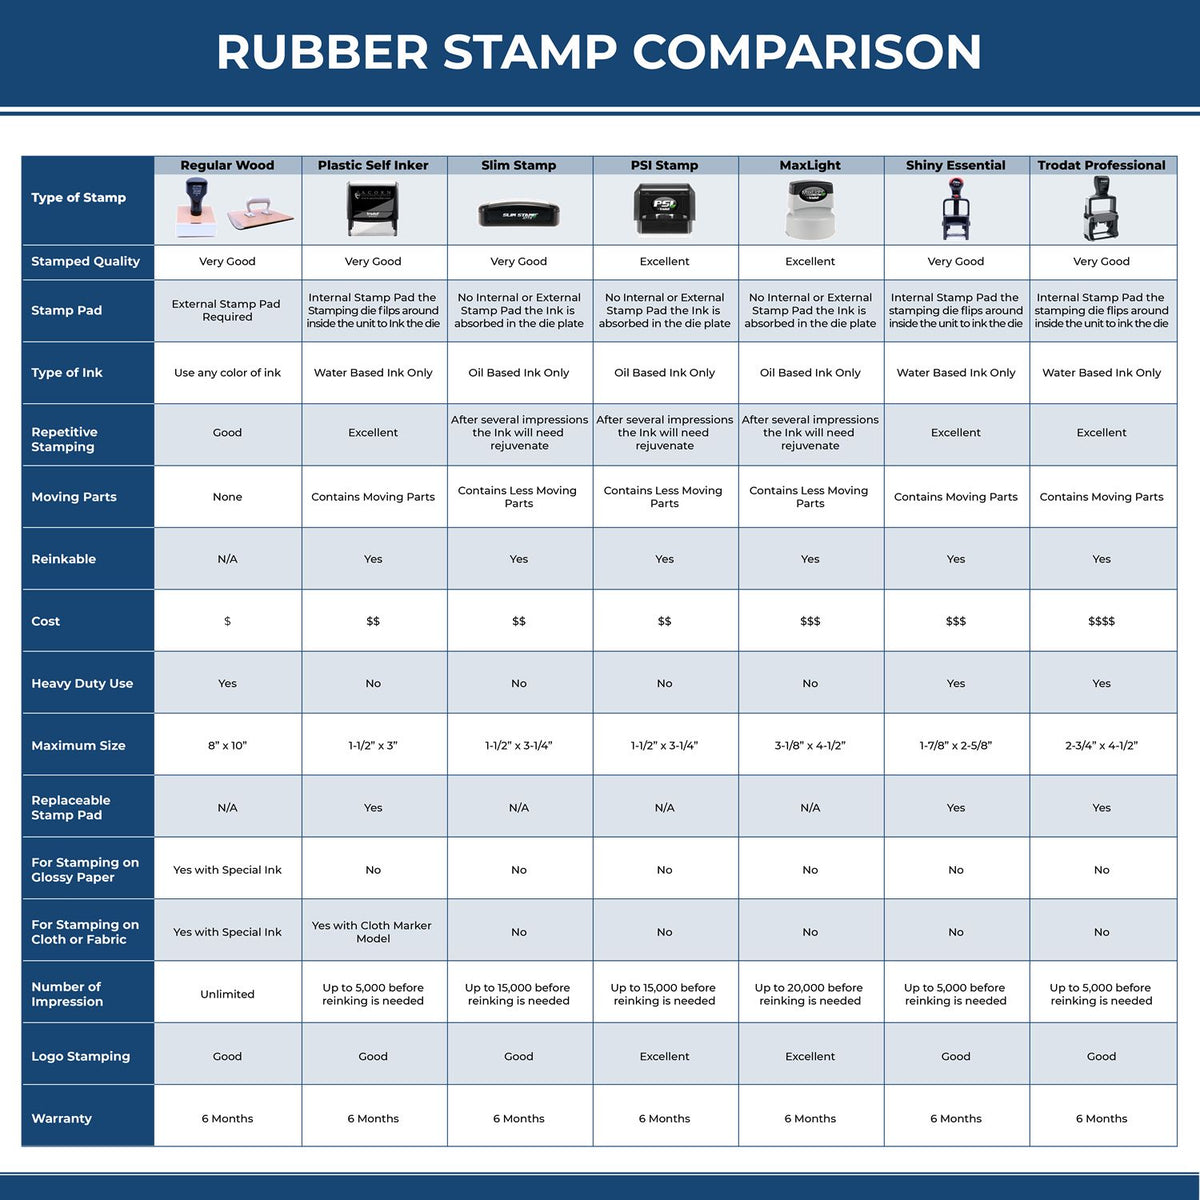 Large Self-Inking Posted with Thumbtack Stamp 5664S Rubber Stamp Comparison